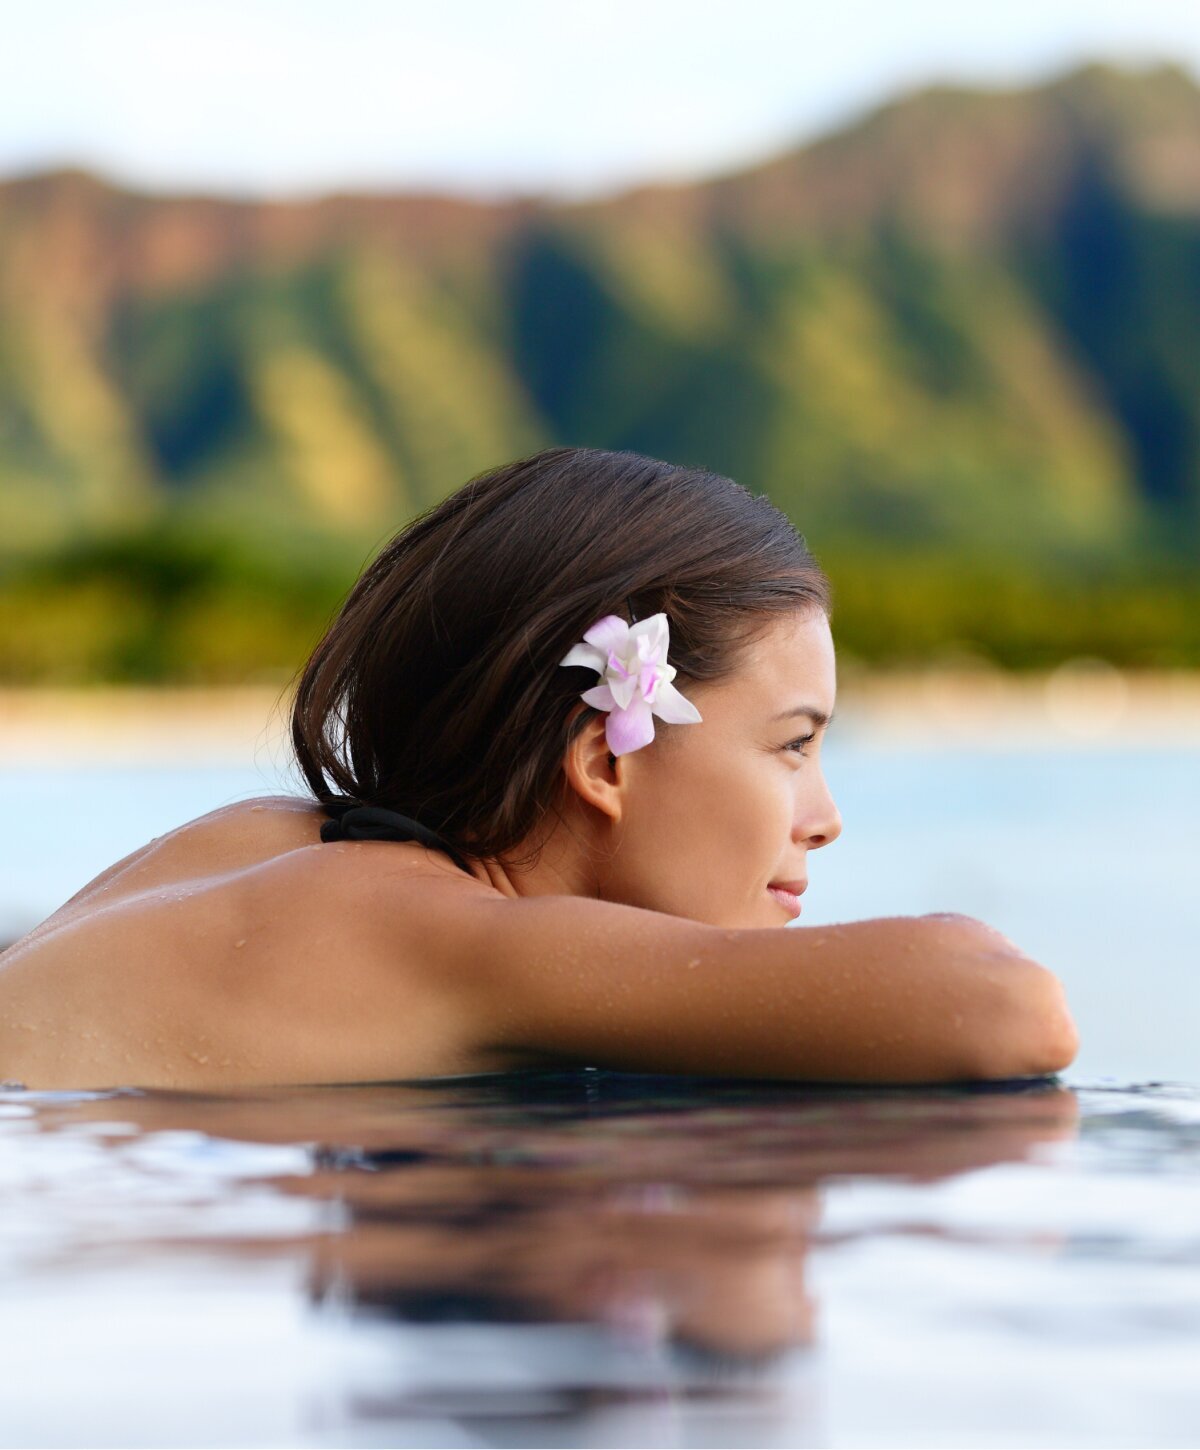 Woman in Infinity Pool with flower in hair